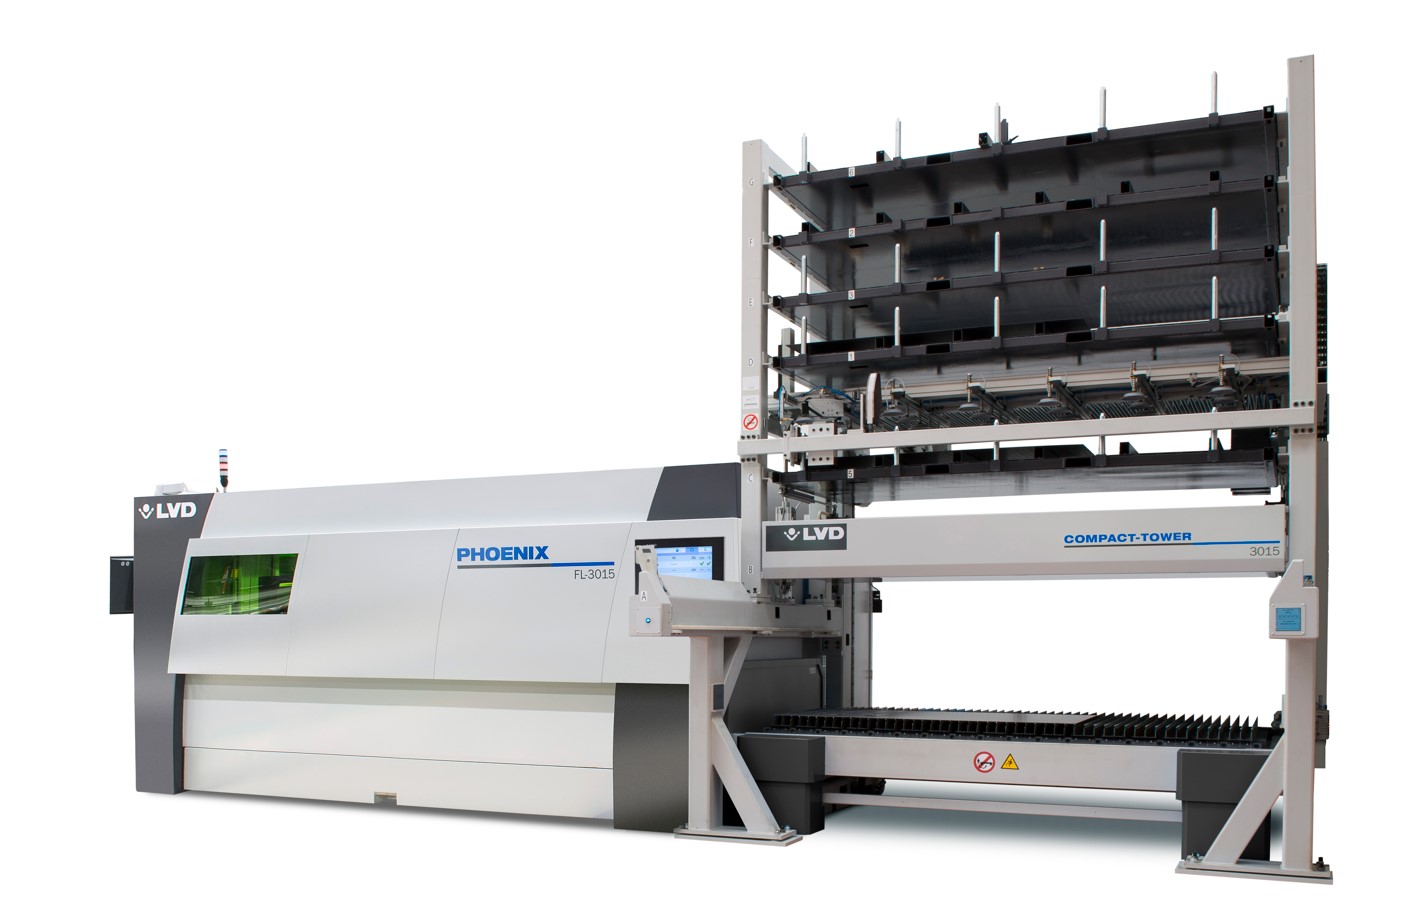 Fiber Laser LVD PHOENIX with compact tower automatisation solution